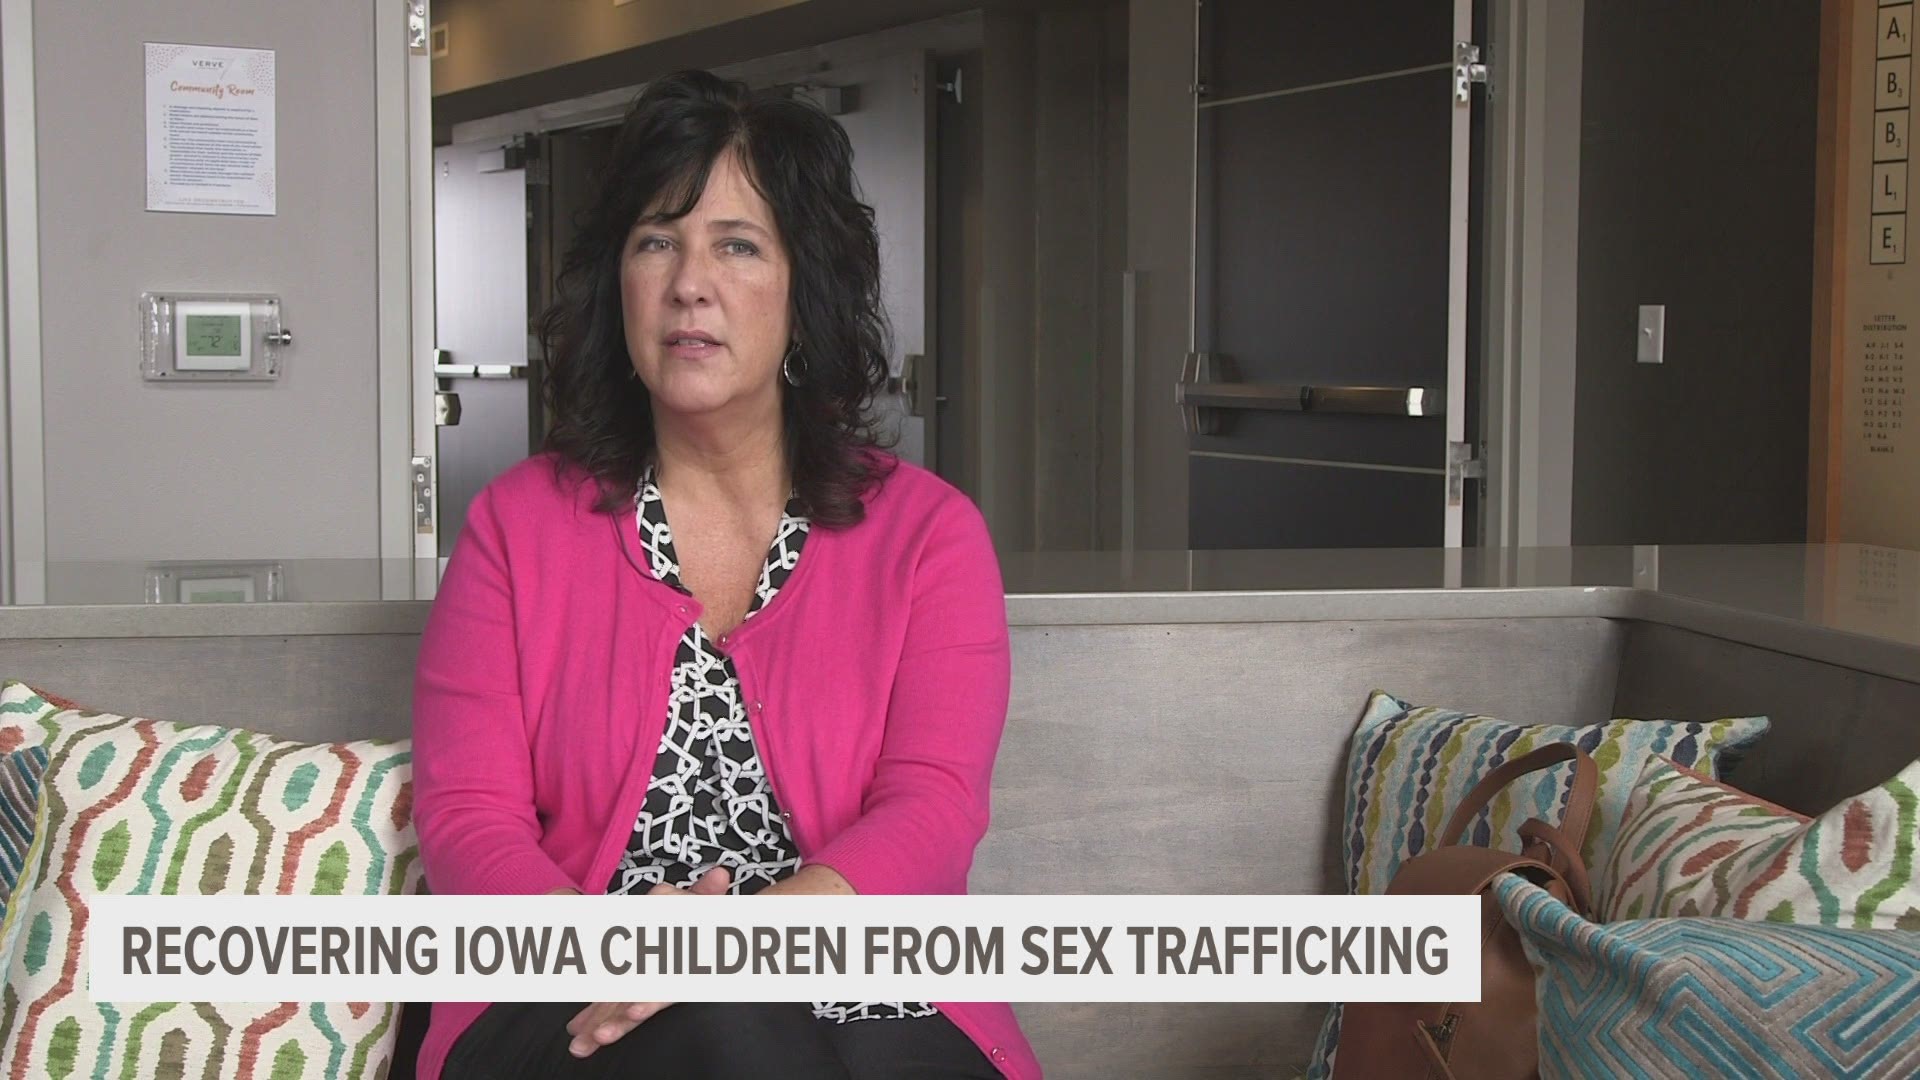 Jana Rhoads says many teens who have been groomed by predators don't conciously consider themselves victims, and it's a long road to recovery and healing.